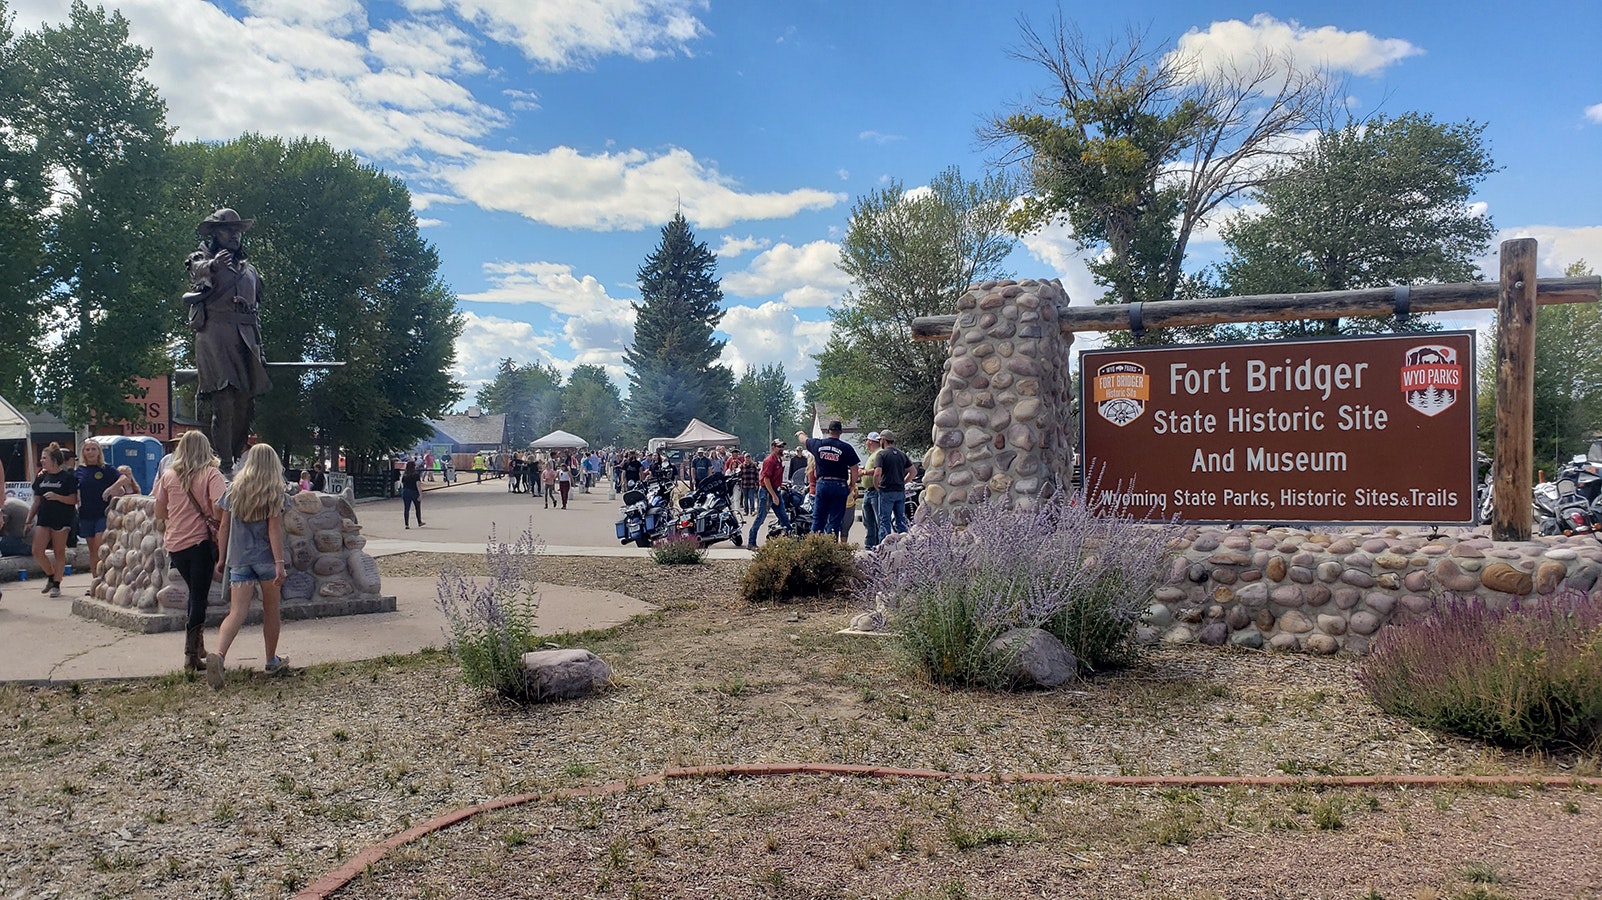 The entrance to Fort Bridger was crawling with people for the annual rendezvous, an estimated 50,000 to 60,000 of them.